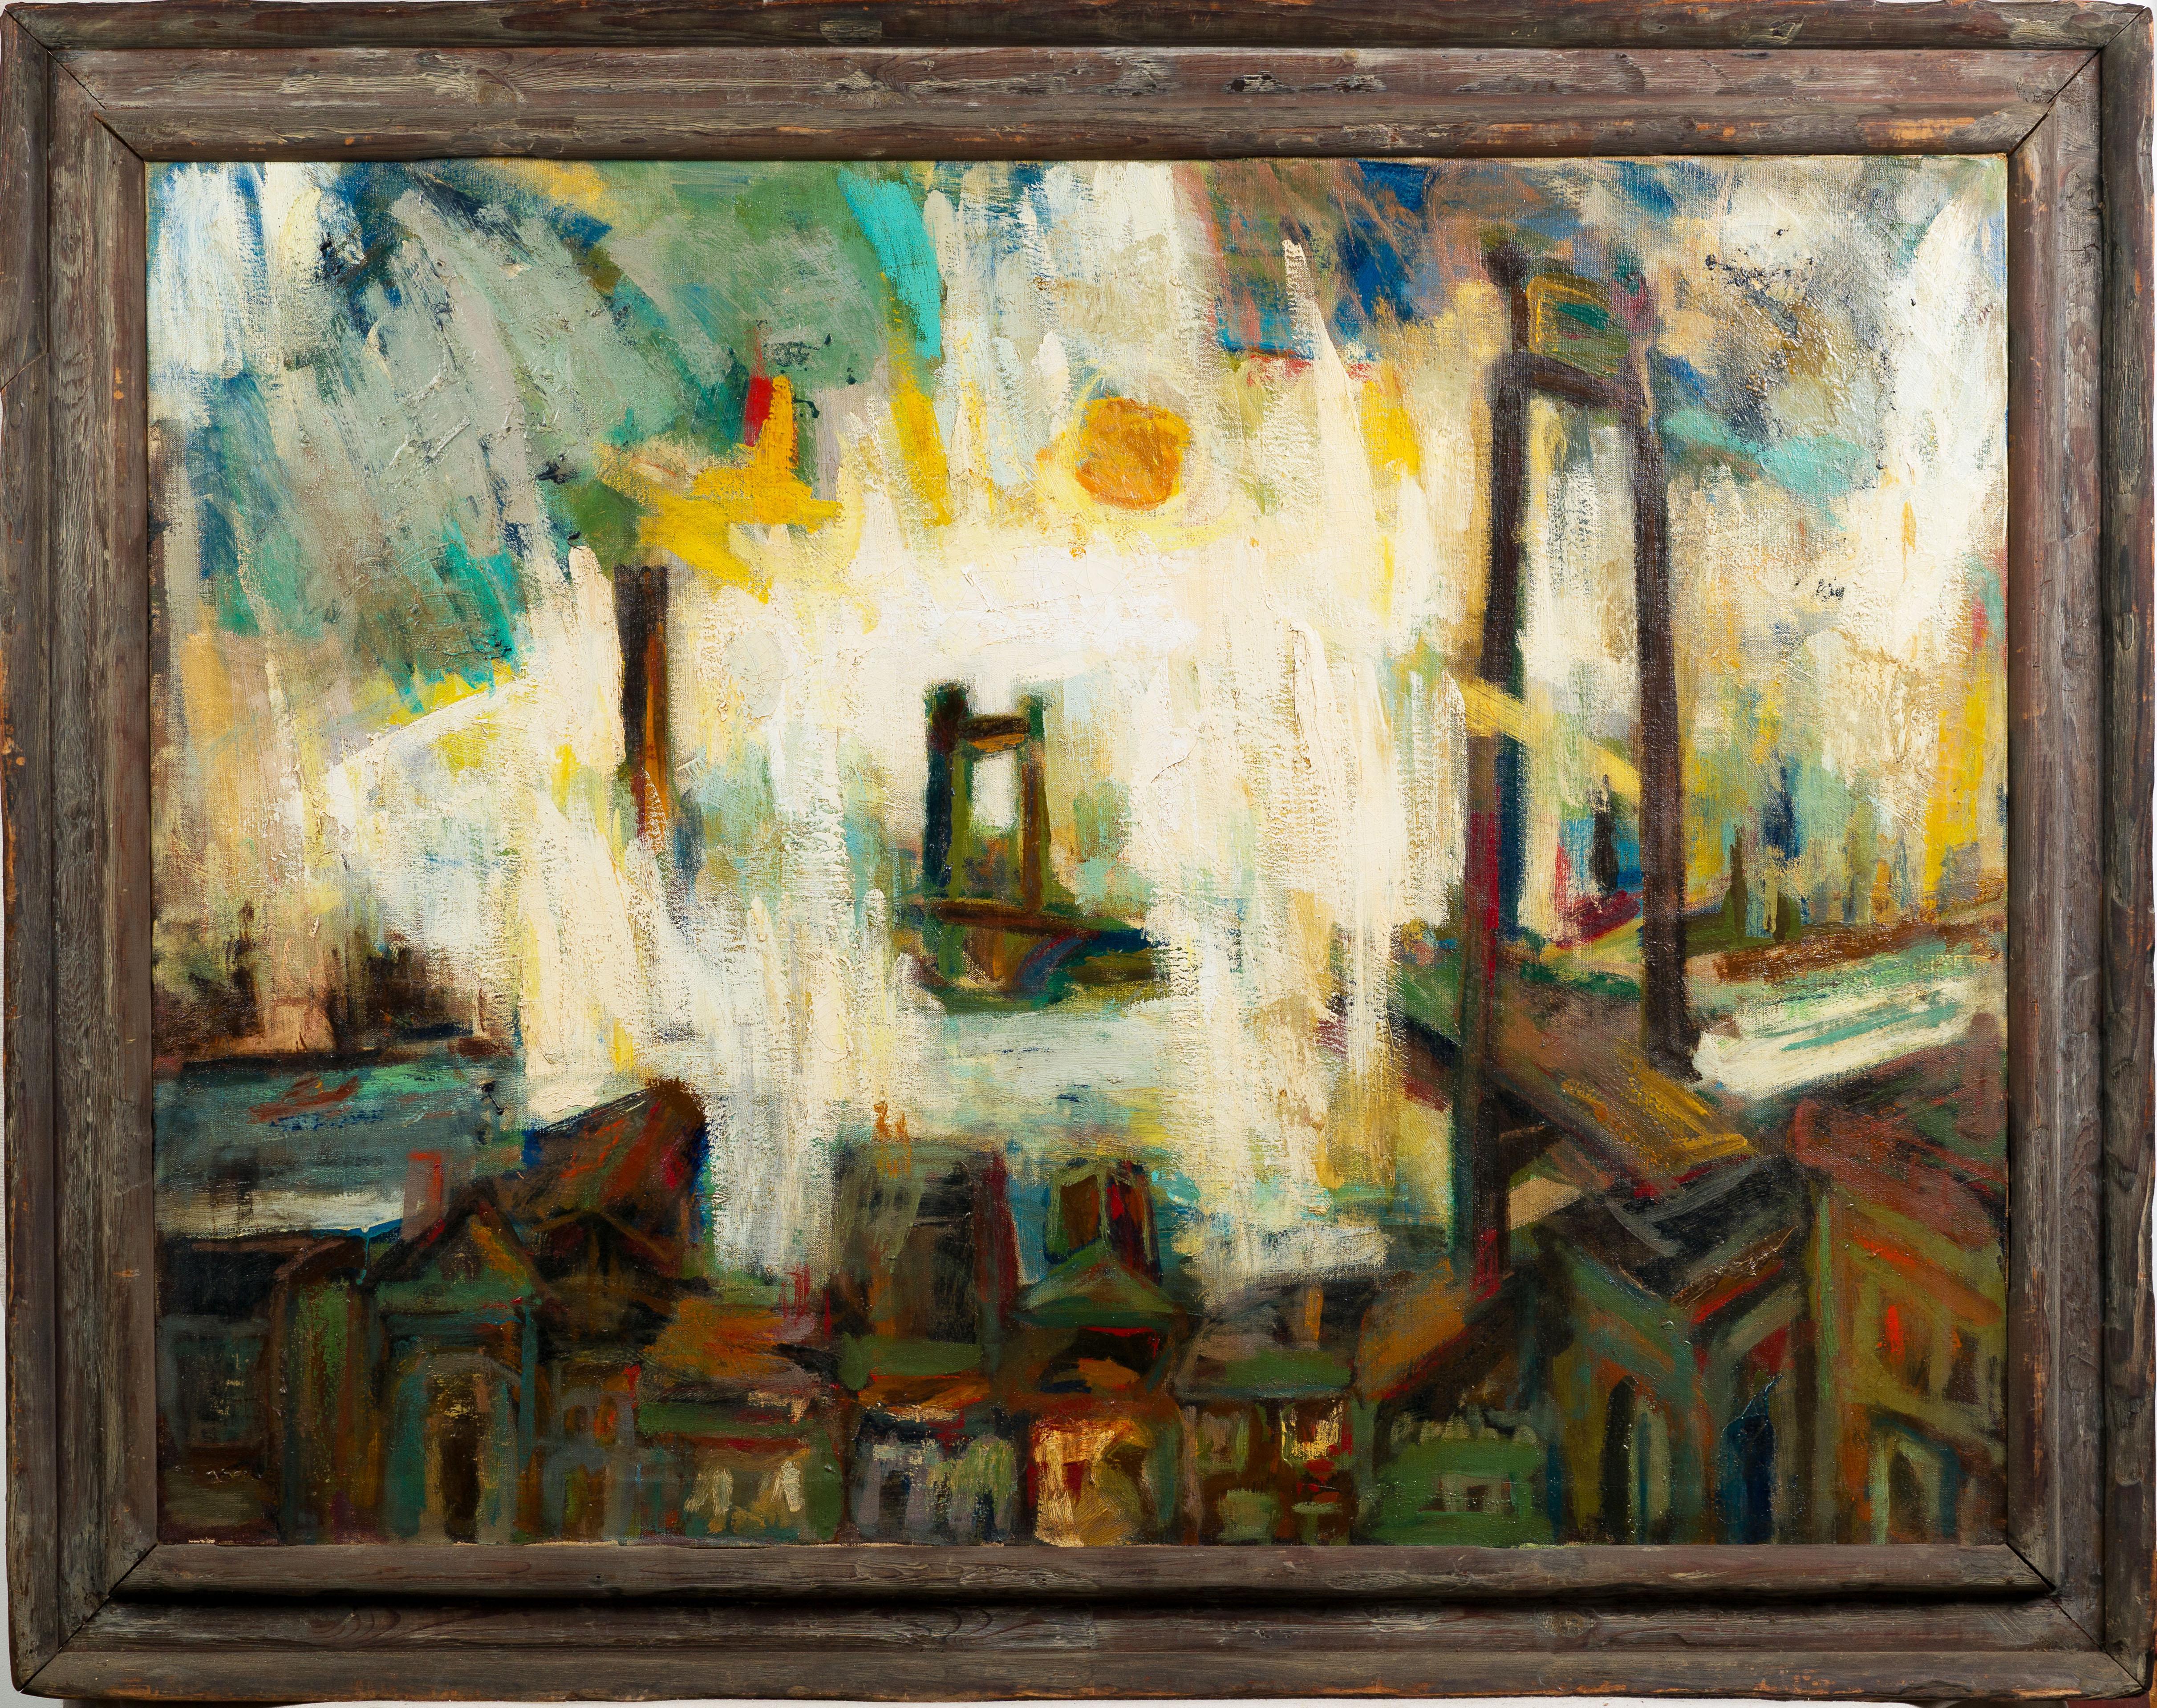 Monumental antique American modernist abstract cityscape oil painting.  Oil on canvas.  Framed.  No signature found. Very impressive painting in person here.  